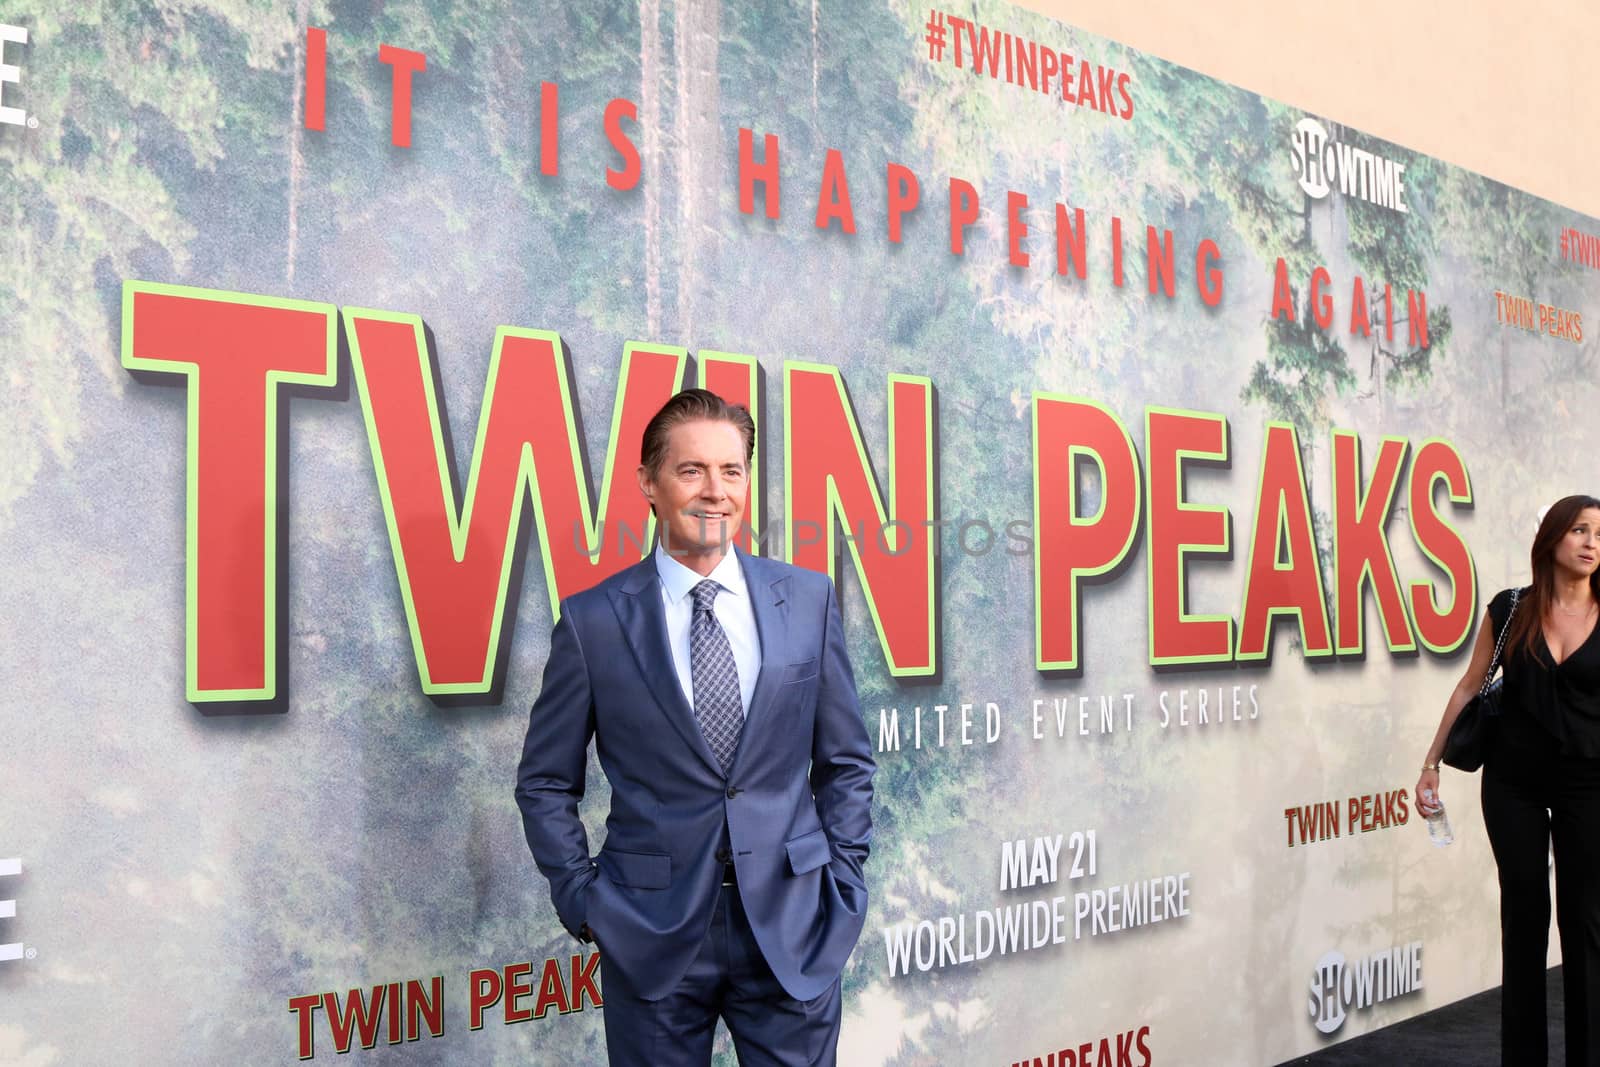 Kyle MacLachlan
at the "Twin Peaks" Premiere Screening, The Theater at Ace Hotel, Los Angeles, CA 05-19-17/ImageCollect by ImageCollect